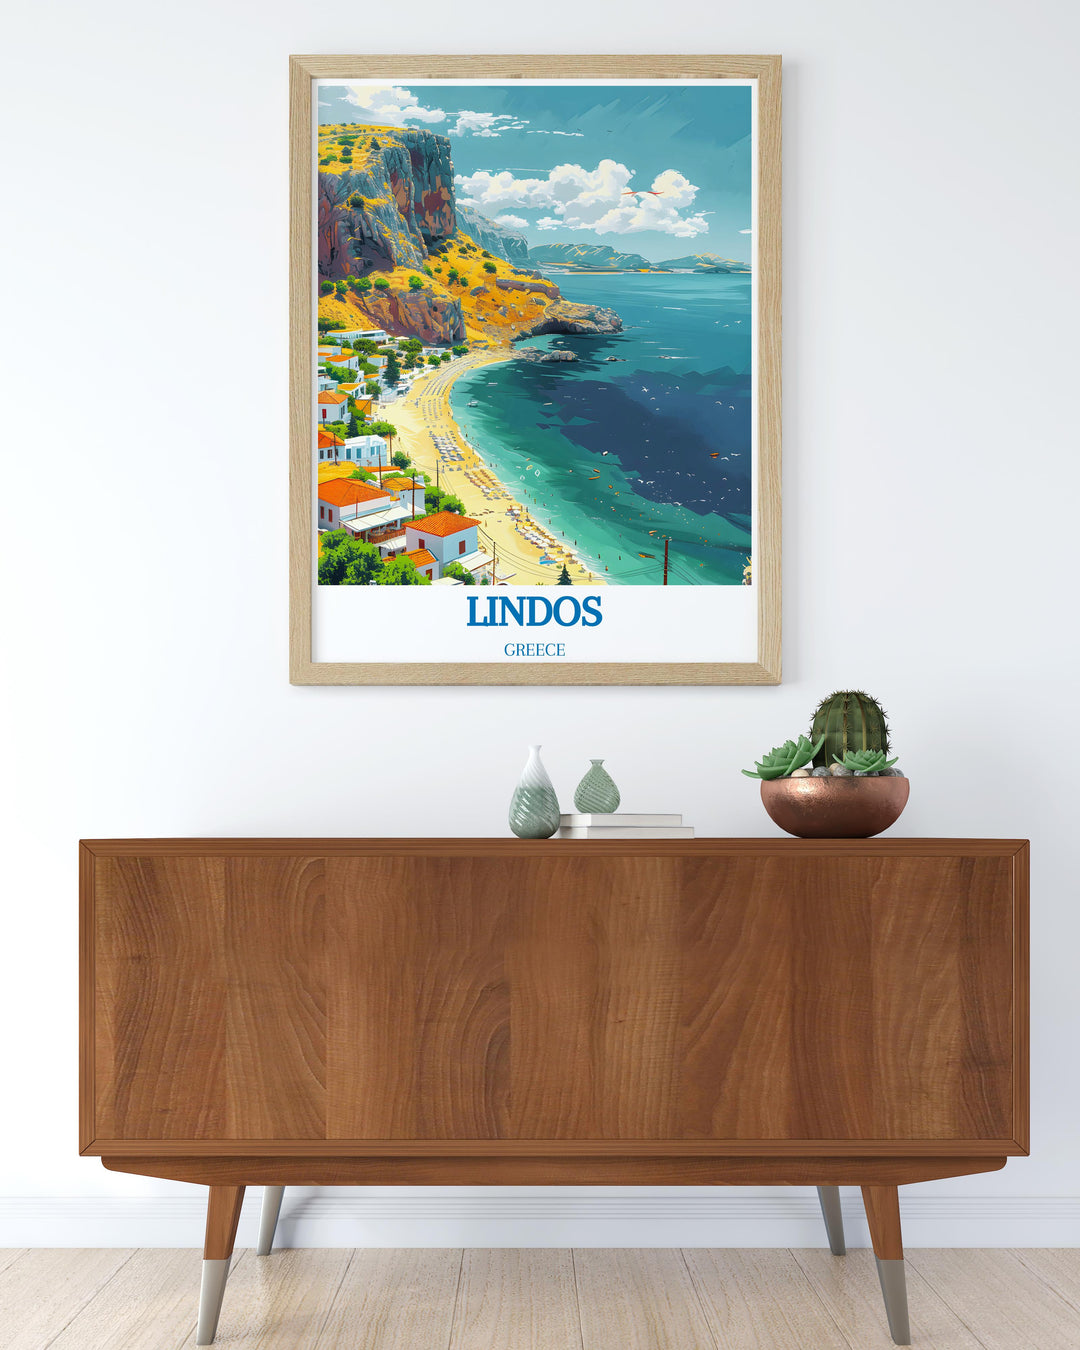 Artistic depiction of the Greek landscape, showing the diversity from Lindos to Athens, suitable for any art enthusiast.